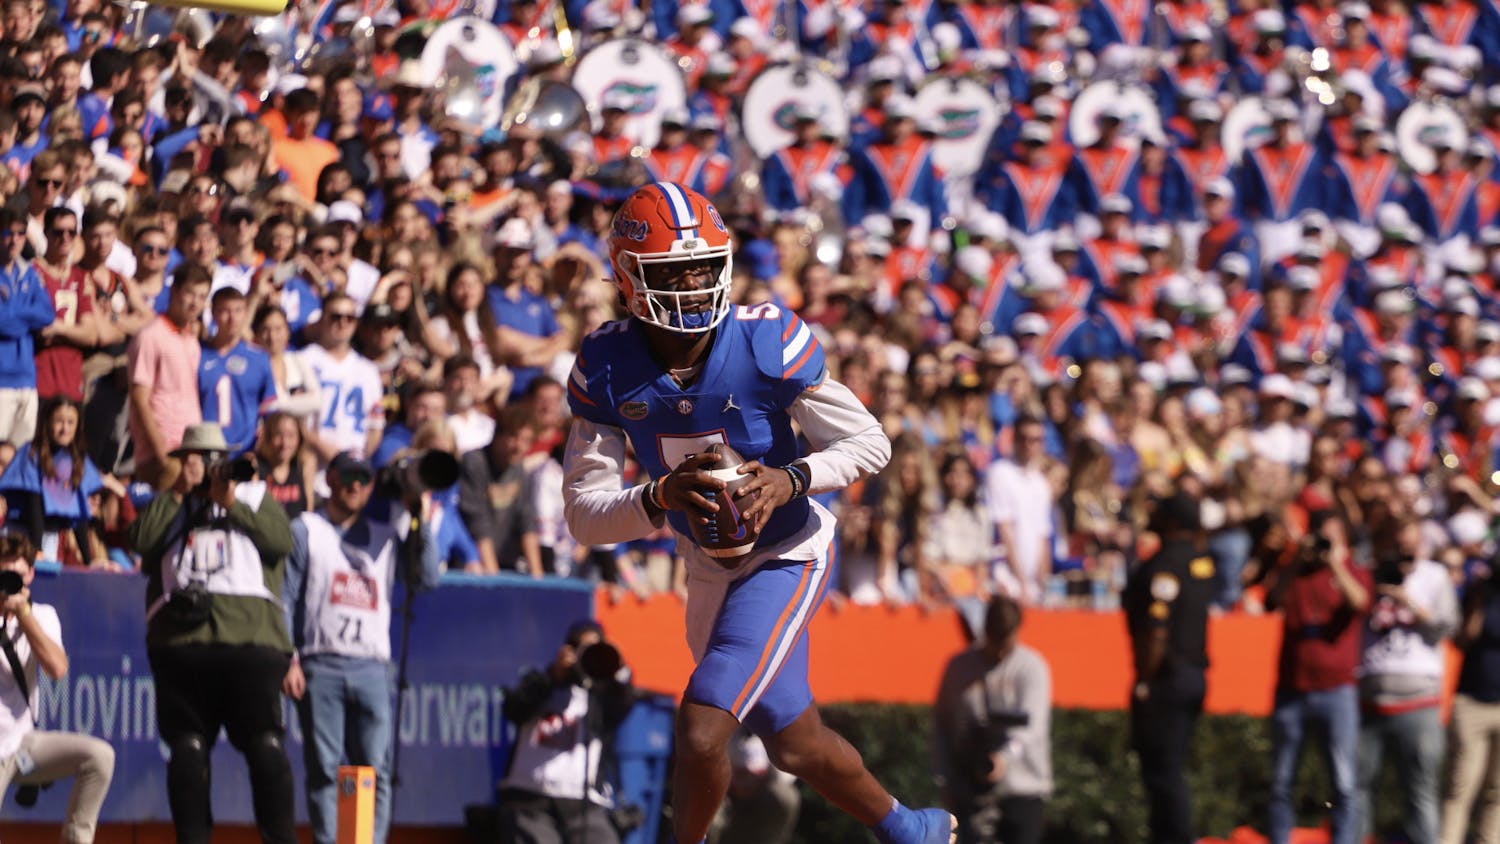 Florida quarterback Emory Jones pictured during a game against Florida State.